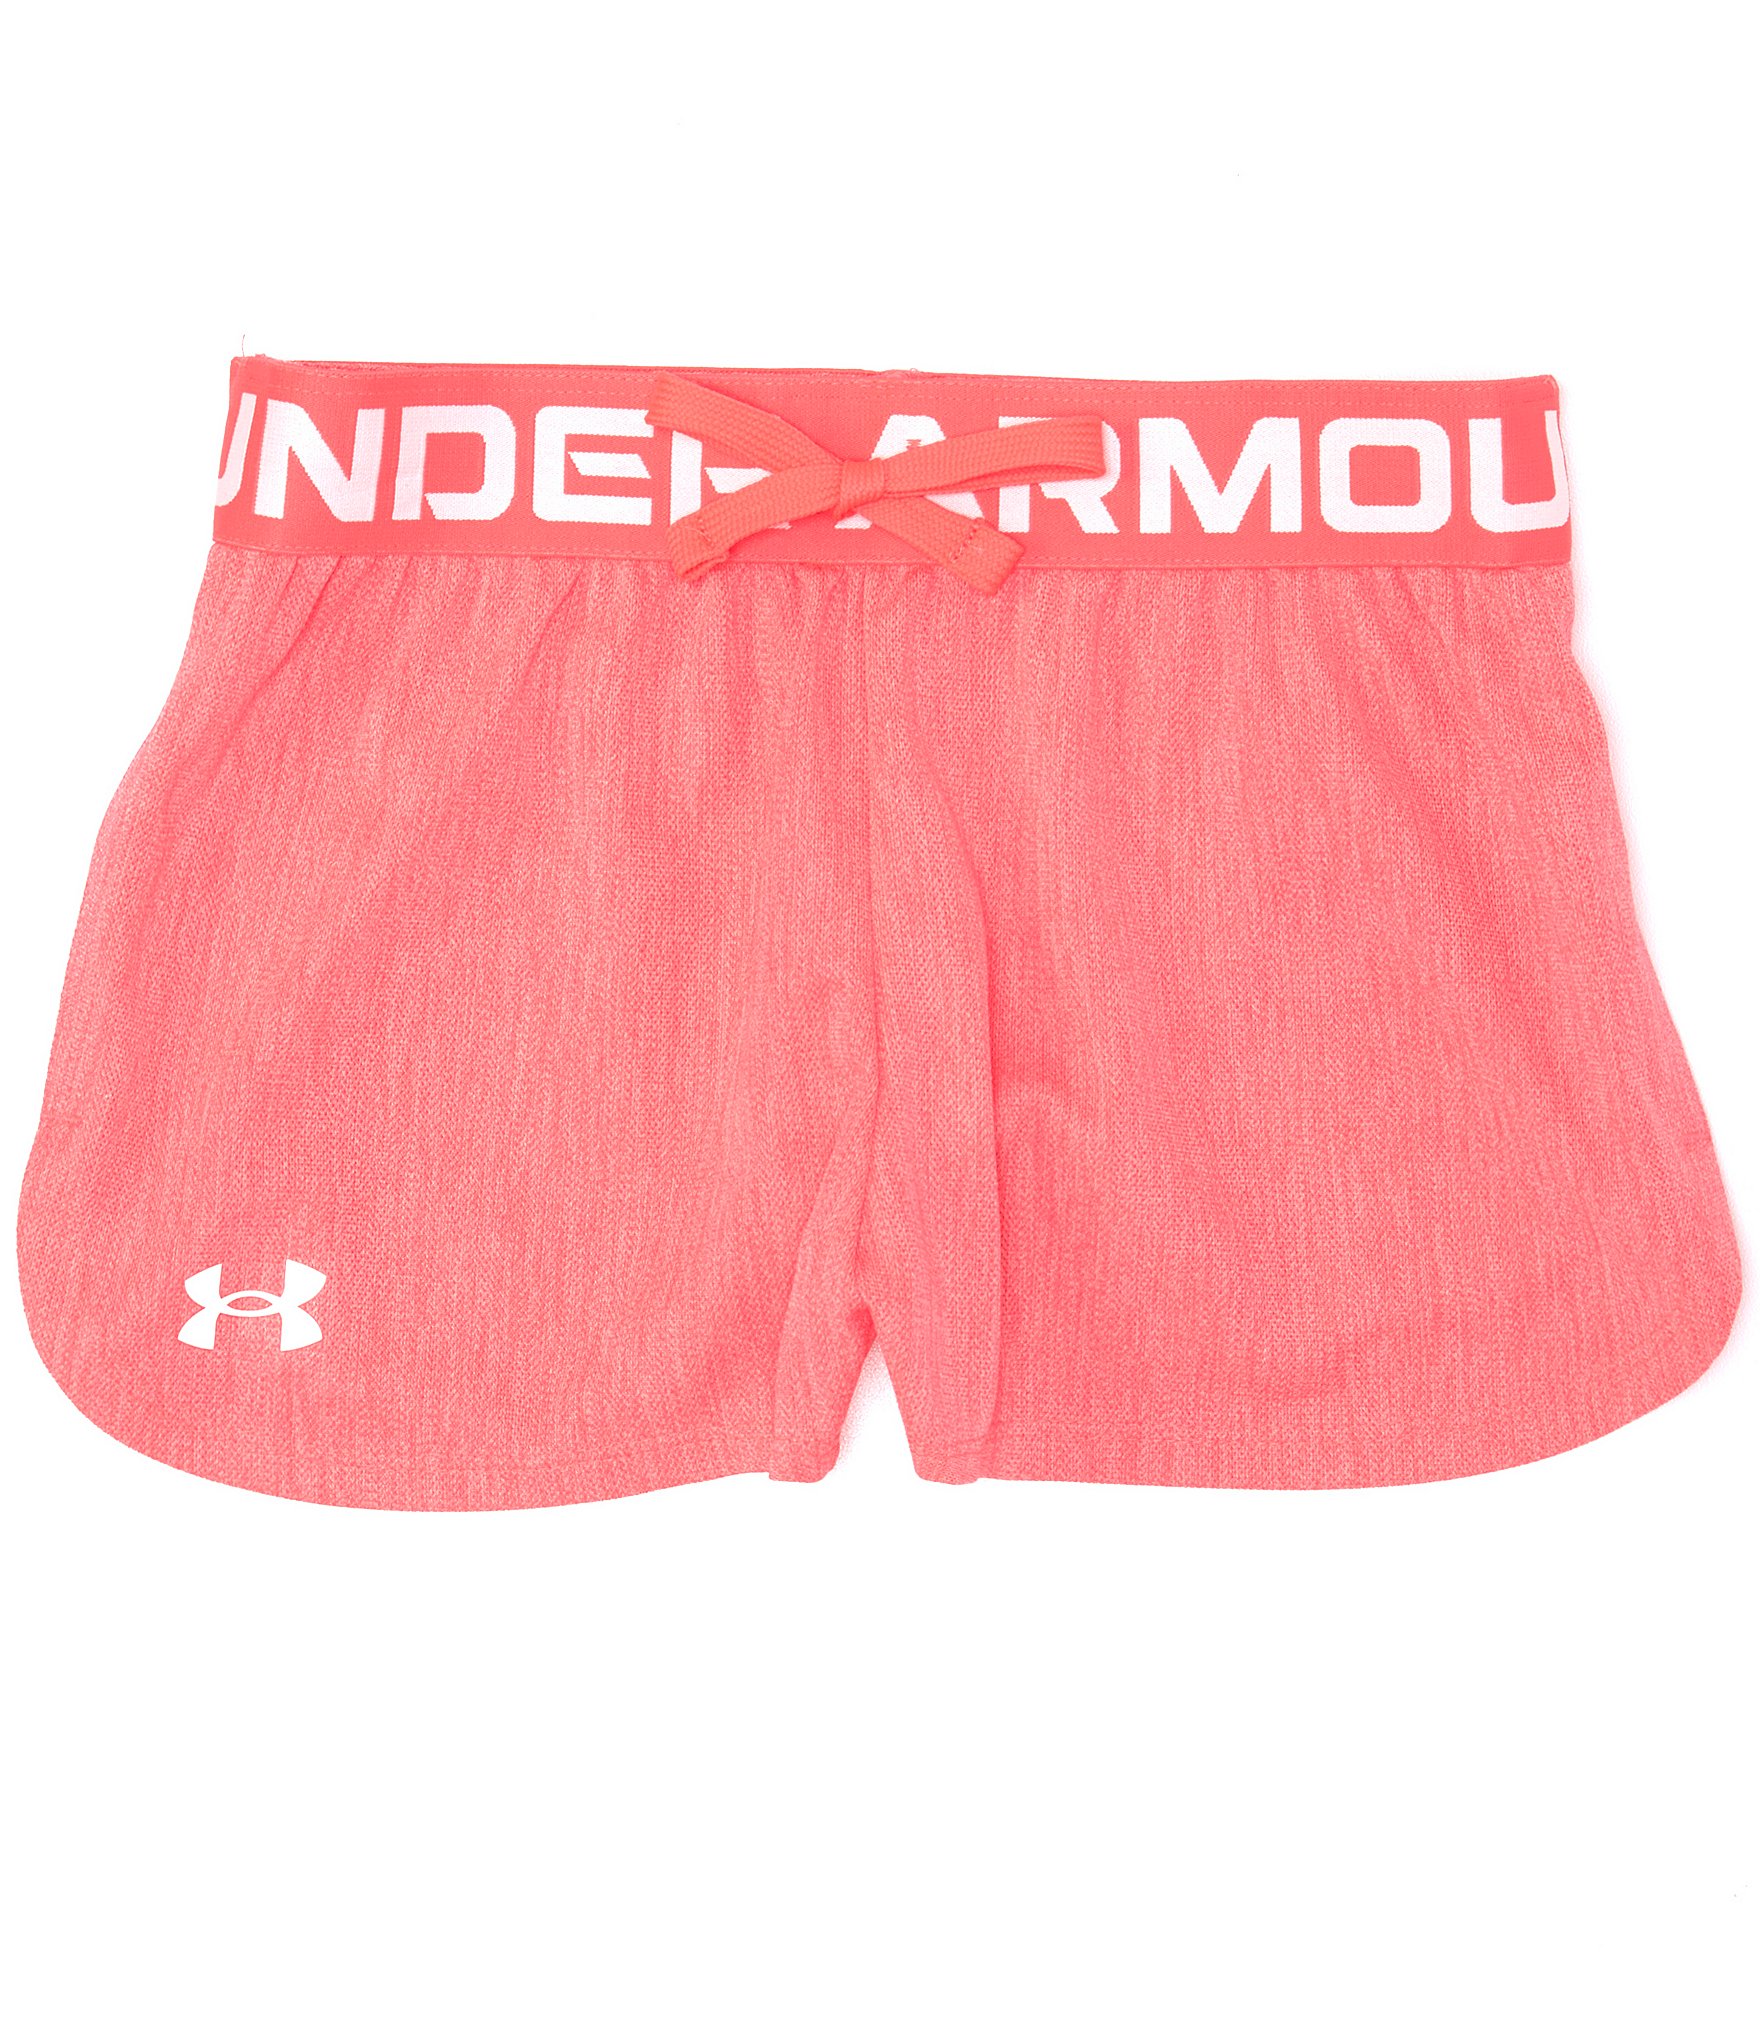 UNDER ARMOUR Women's Play Up Mesh Shorts - Bob's Stores